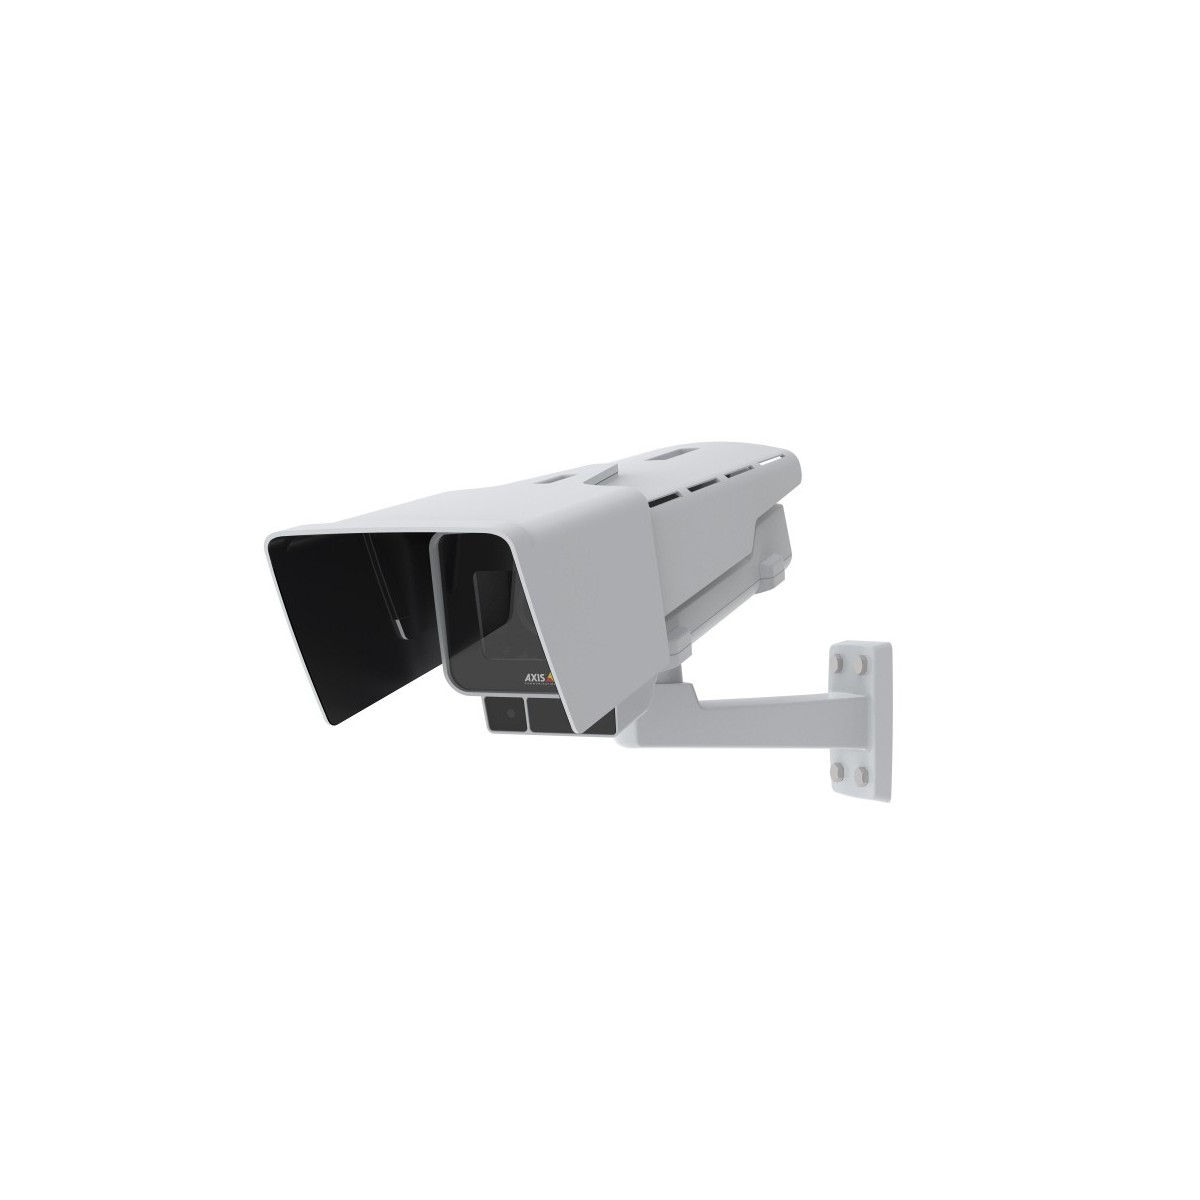 Axis P1377-LE Barebone - IP security camera - Outdoor - Wired - Digital PTZ - Pelco-D - Simplified Chinese - Traditional Chinese